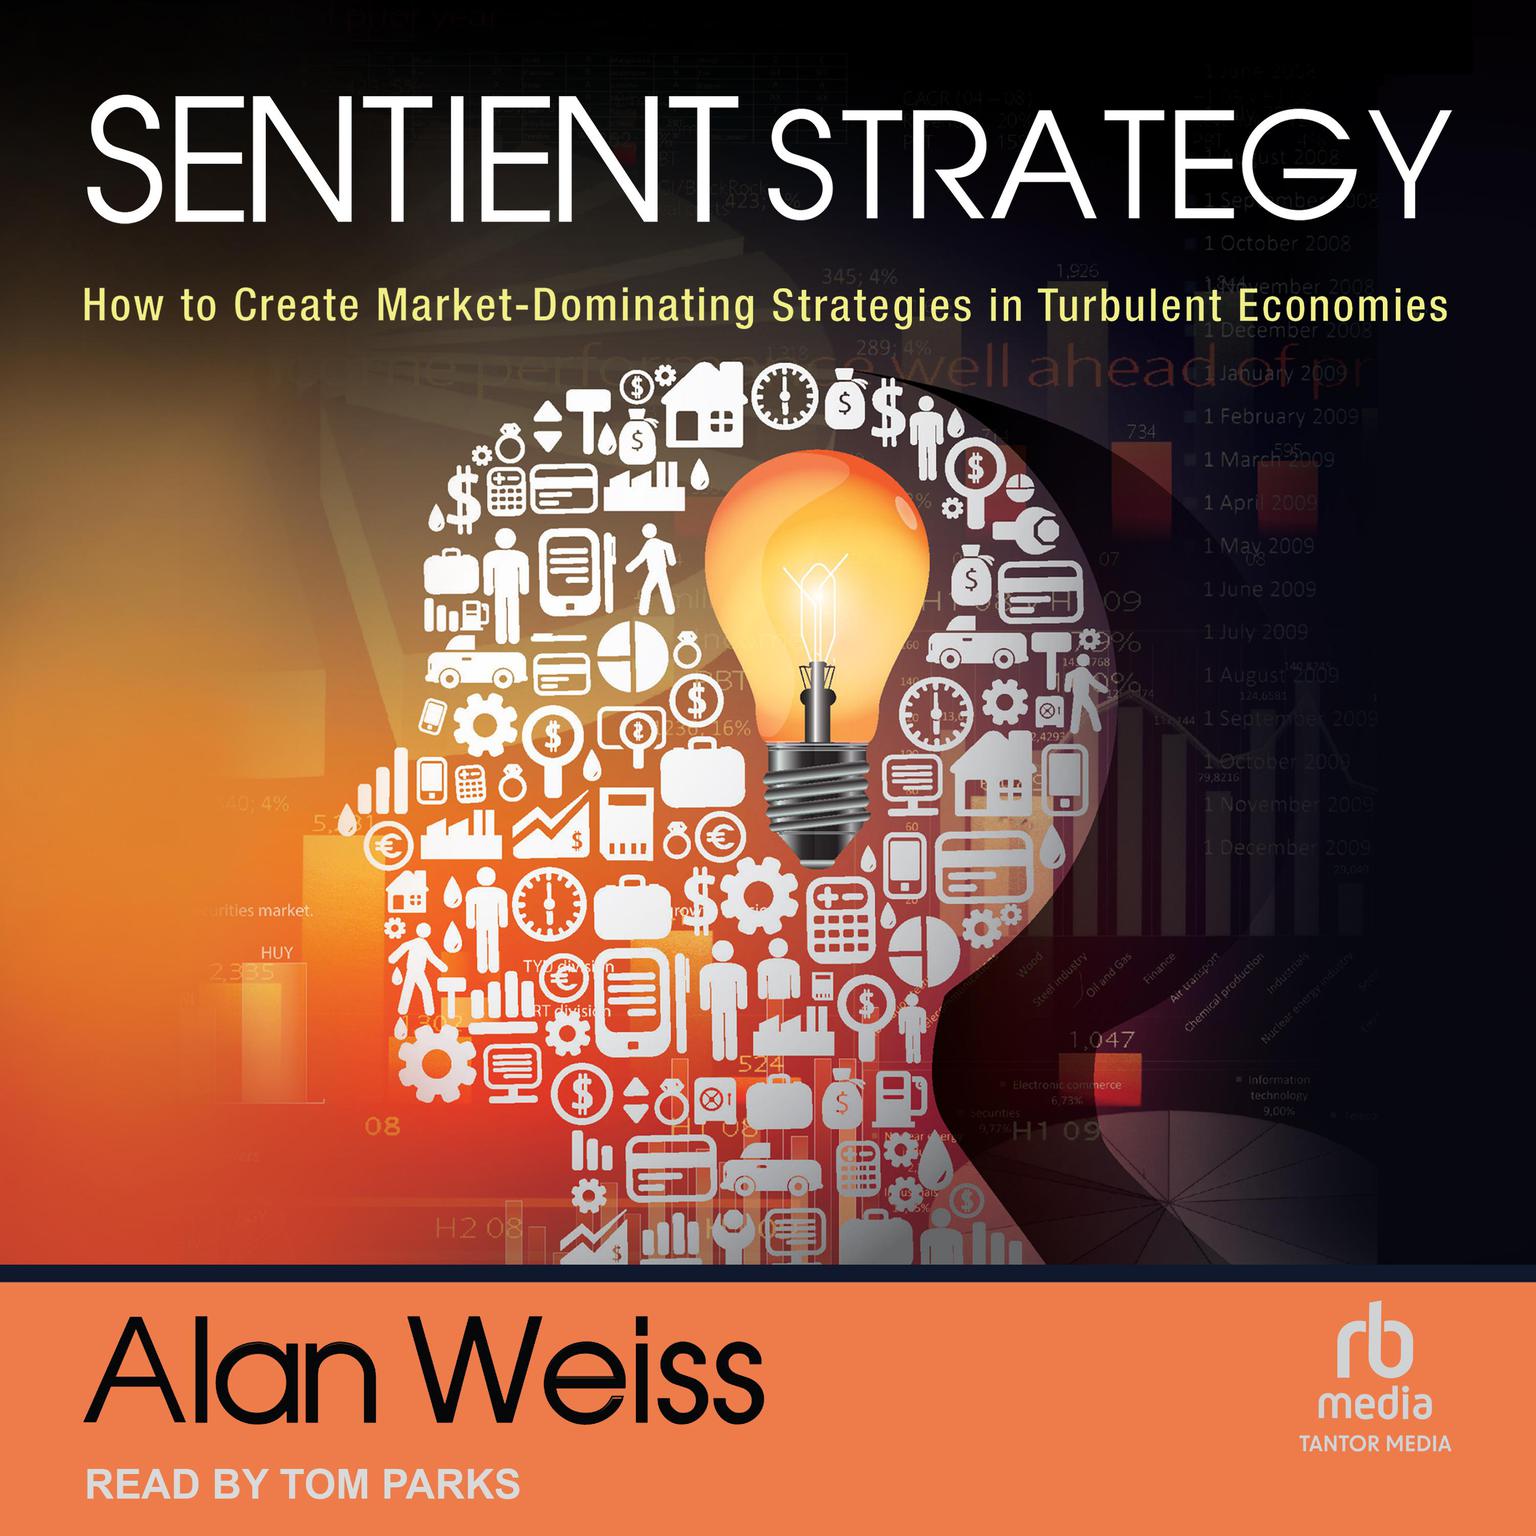 Sentient Strategy: How to Create Market-Dominating Strategies in Turbulent Economies Audiobook, by Alan Weiss